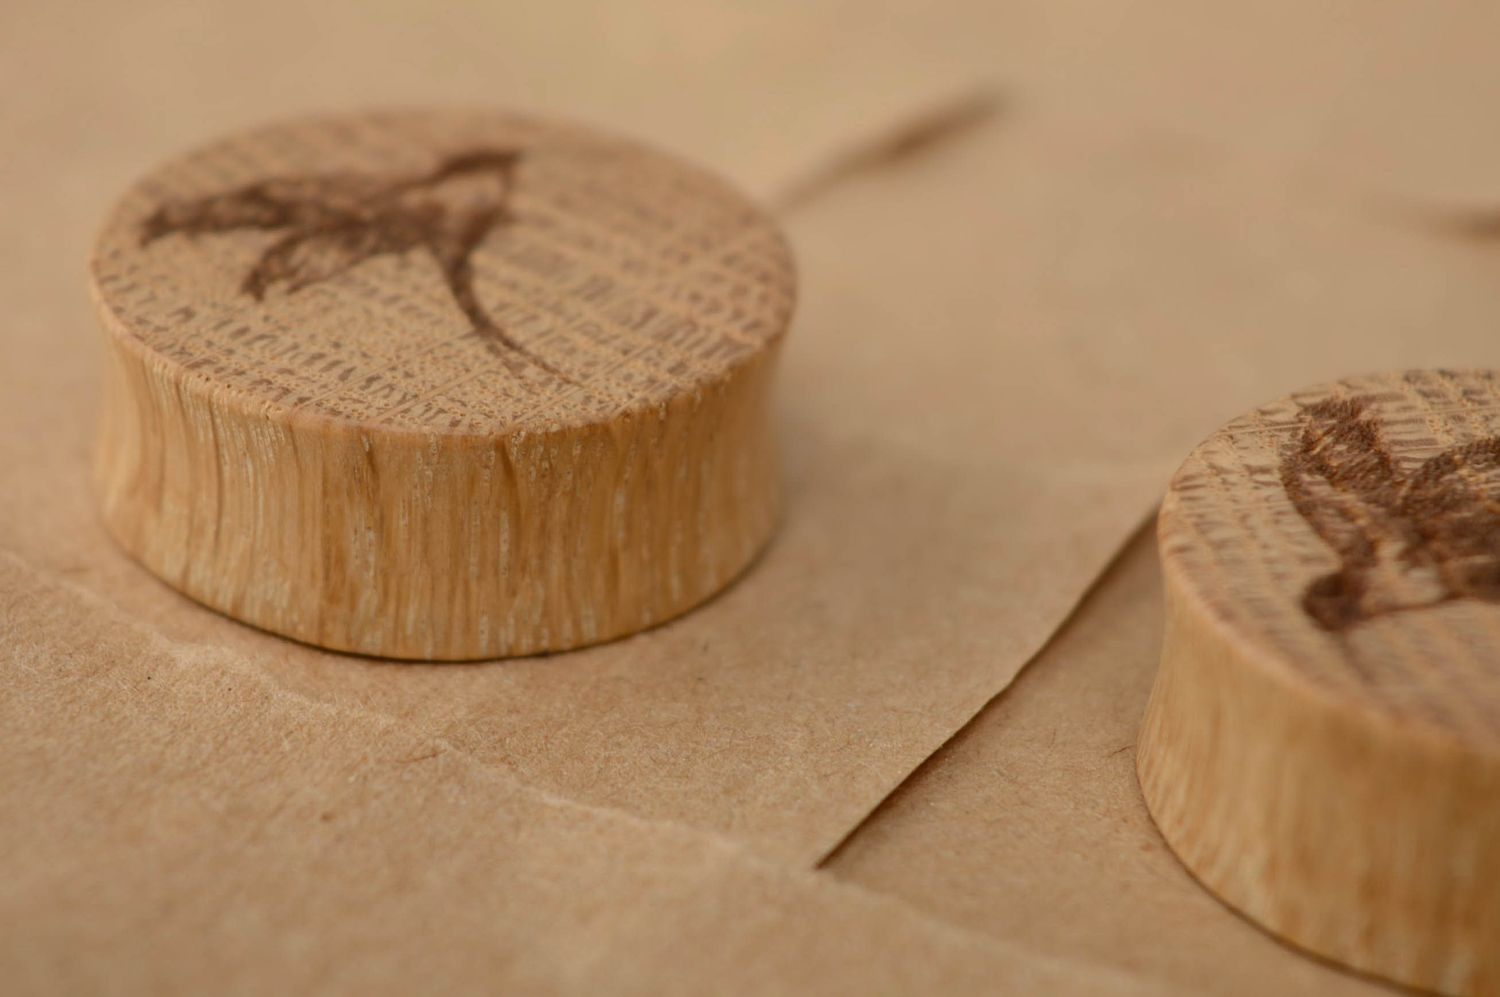 Wooden ear plugs with engraving photo 4